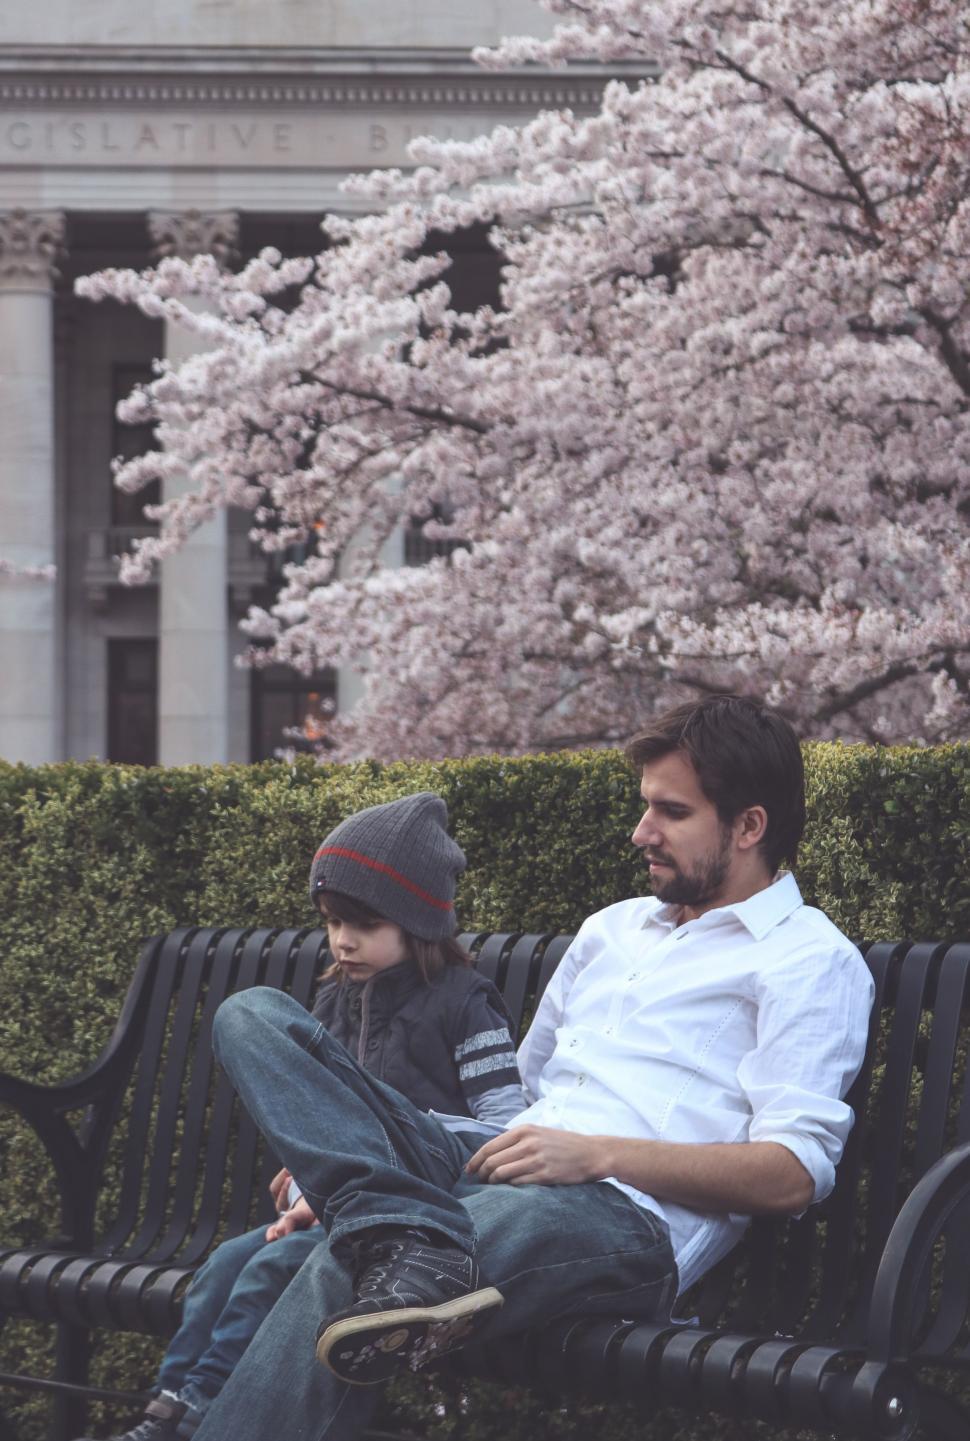 Free Image of Father and Son on Bench  